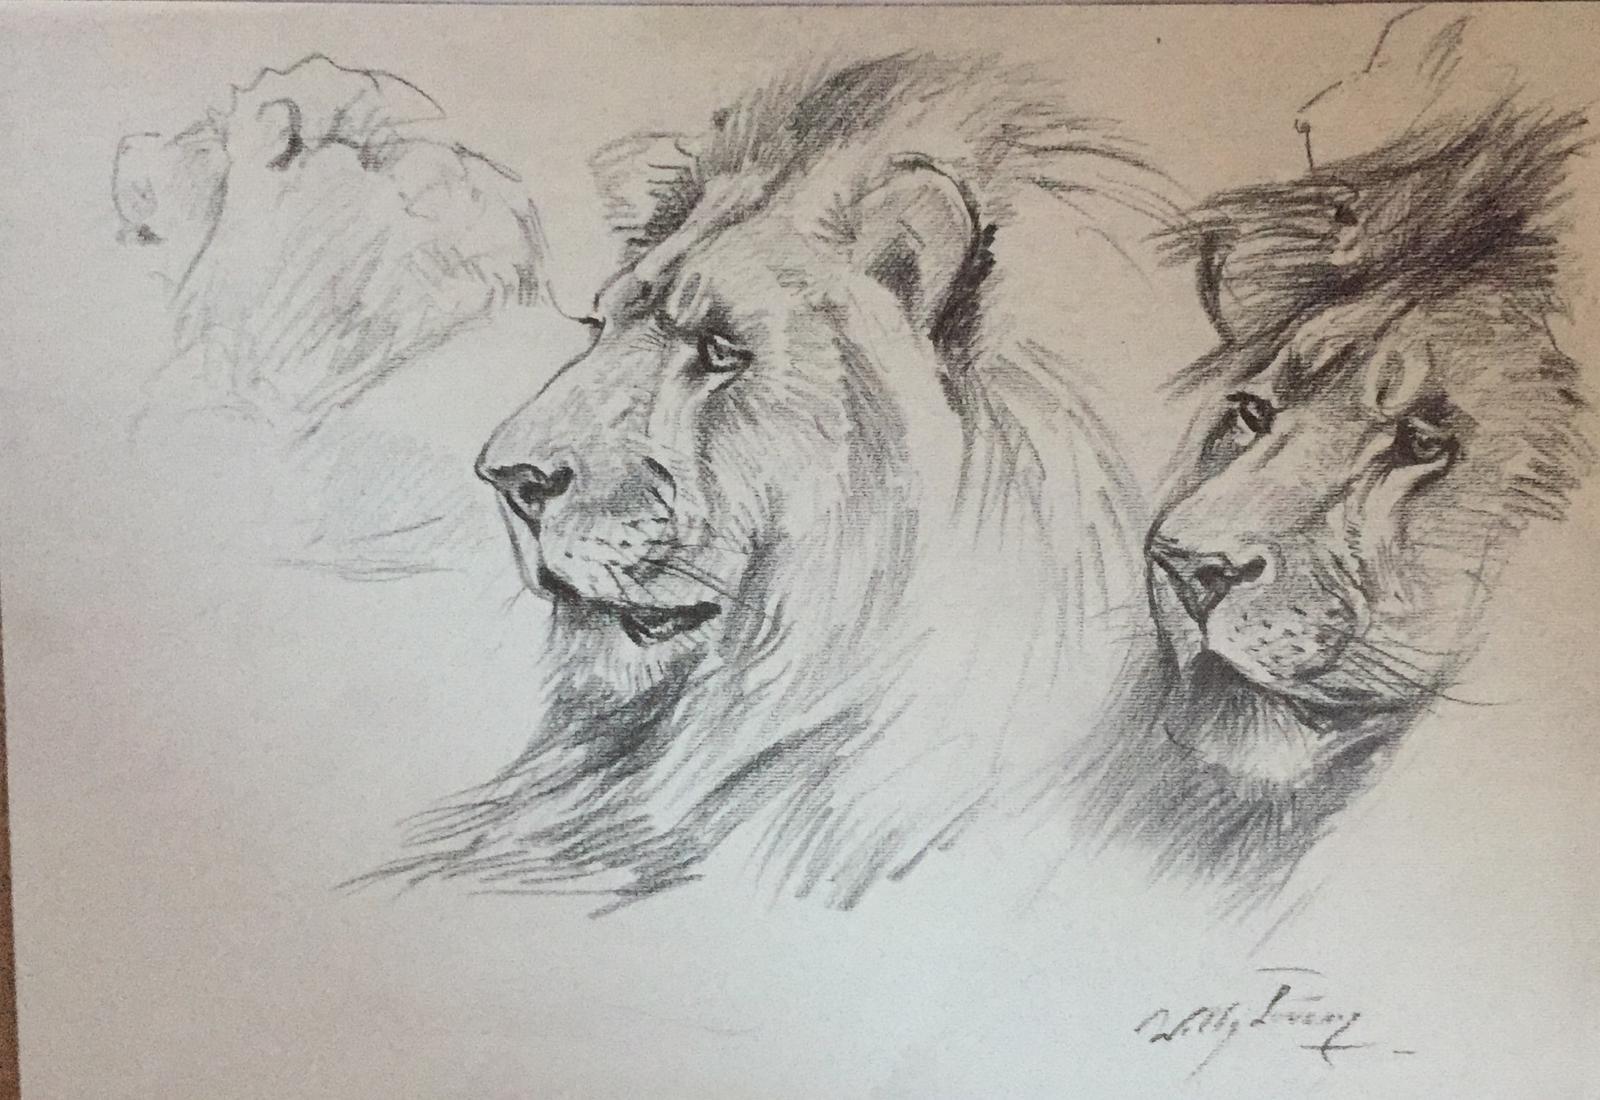 Lion is a beautiful original drawing on ivory-colored paper realized in the Mid-20 Century by the German artist Wilhelm Lorenz, also known as Willi Lorenz. 

This is a preparatory study representing three muzzles of a lion, made with fresh lines and